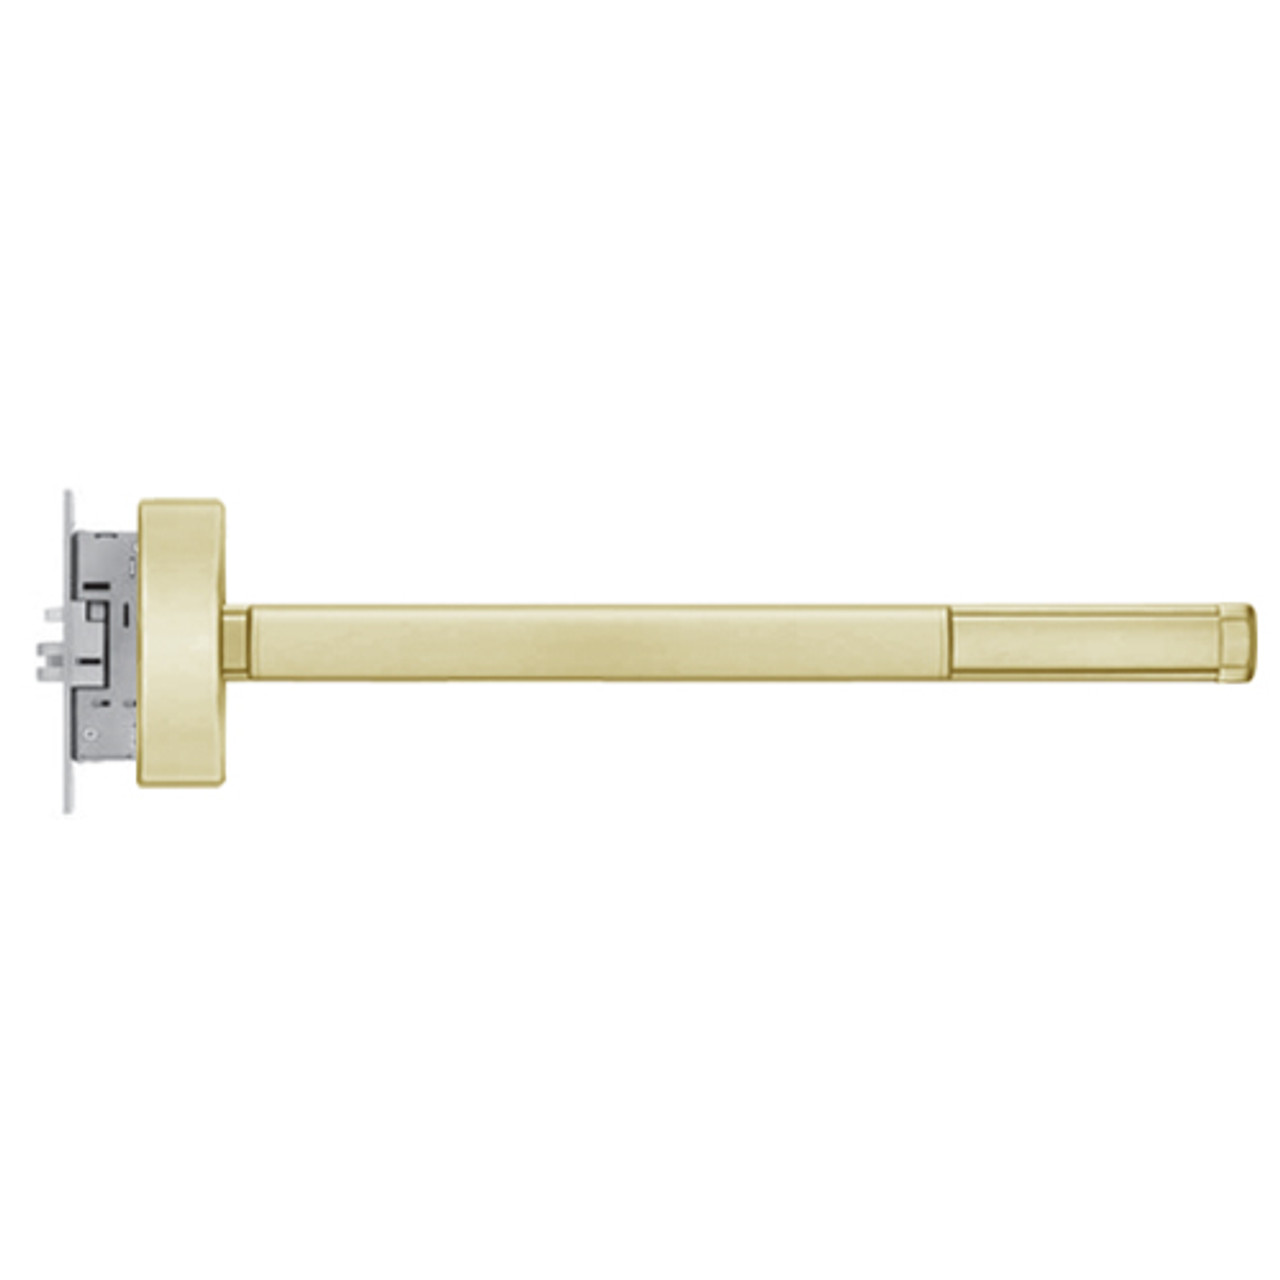 MLRFL2314-LHR-606-36 PHI 2300 Series Fire Rated Apex Mortise Exit Device with Motorized Latch Retraction Prepped for Lever-Knob Always Active in Satin Brass Finish